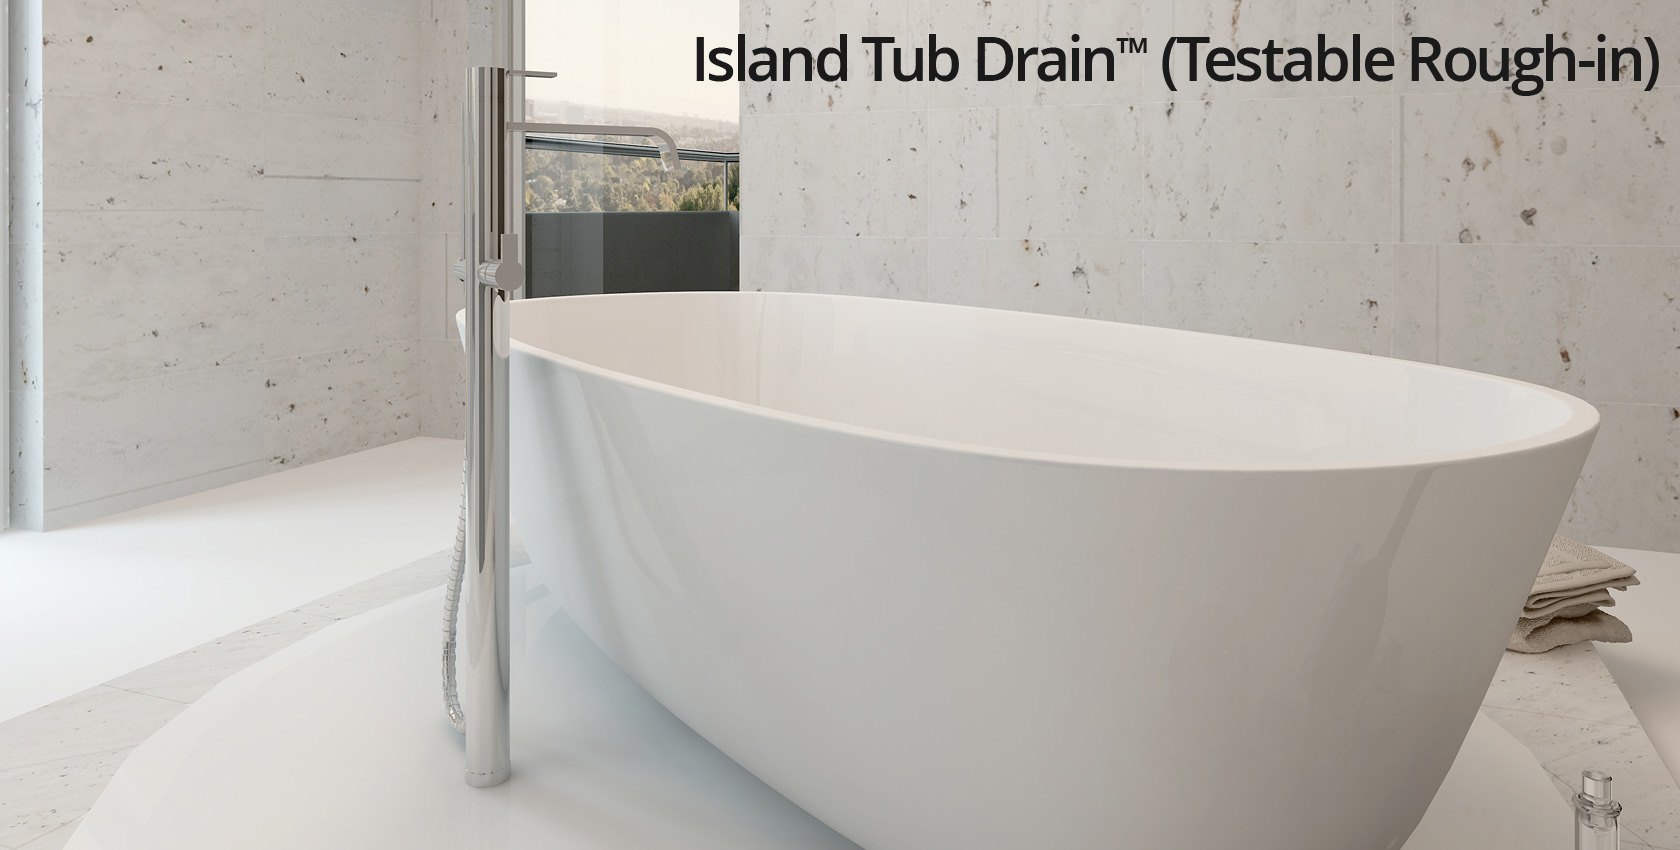 Island Tub Drain Testable Rough In Os B Your Job Just